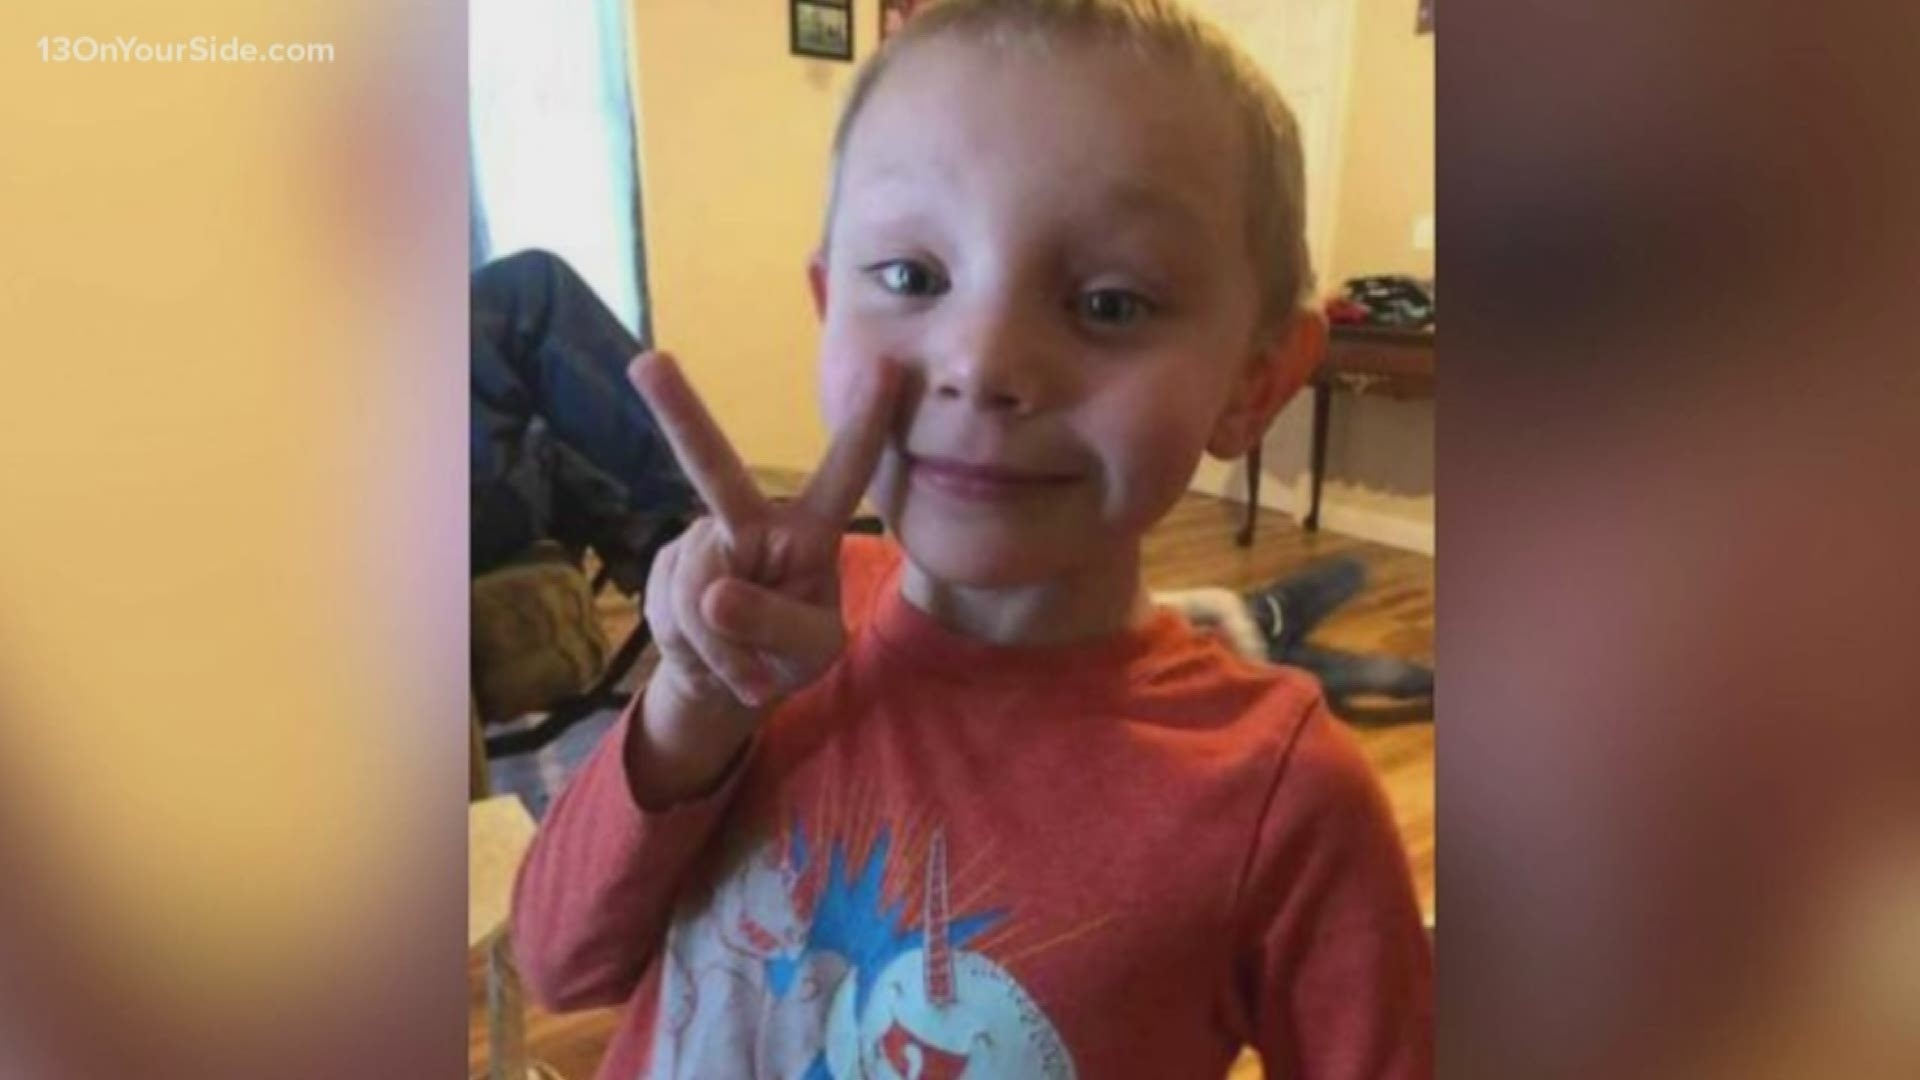 A Michigan State Police trooper said he was told a thousand people helped search for Beau Belson, 5, who was reported missing Christmas Day and later found dead.